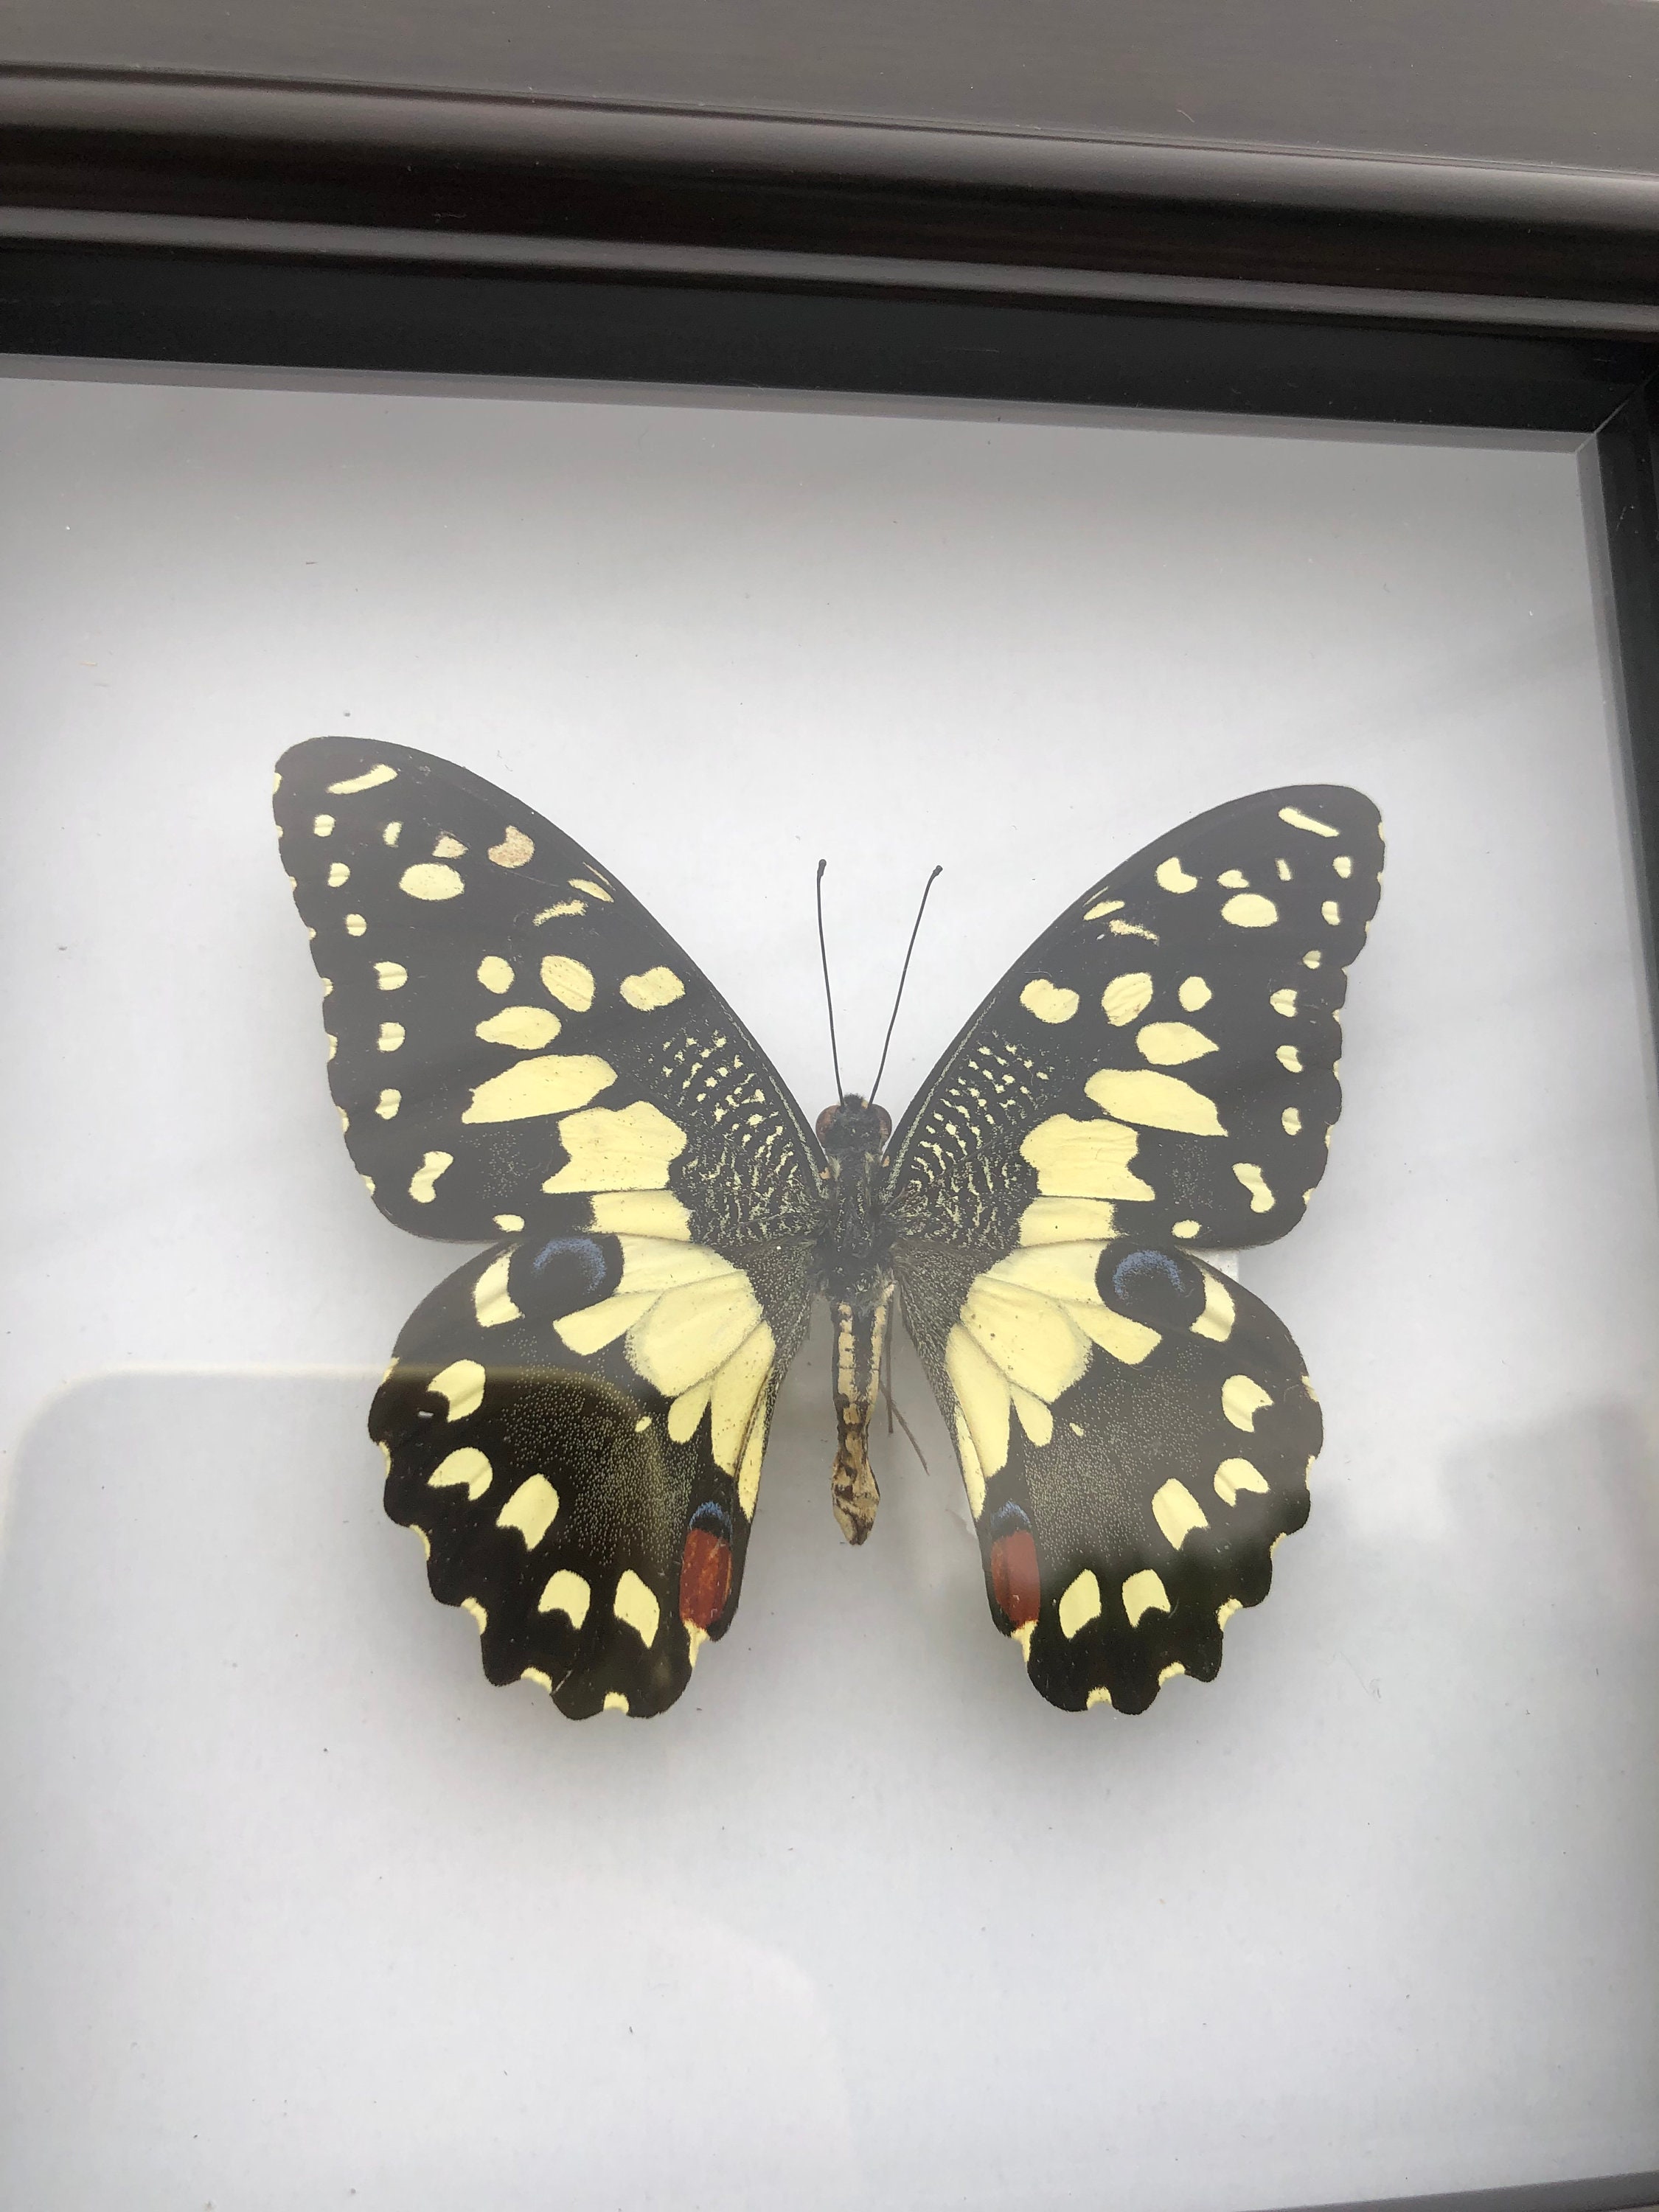 The astounding story of the fake butterfly specimen Papilio